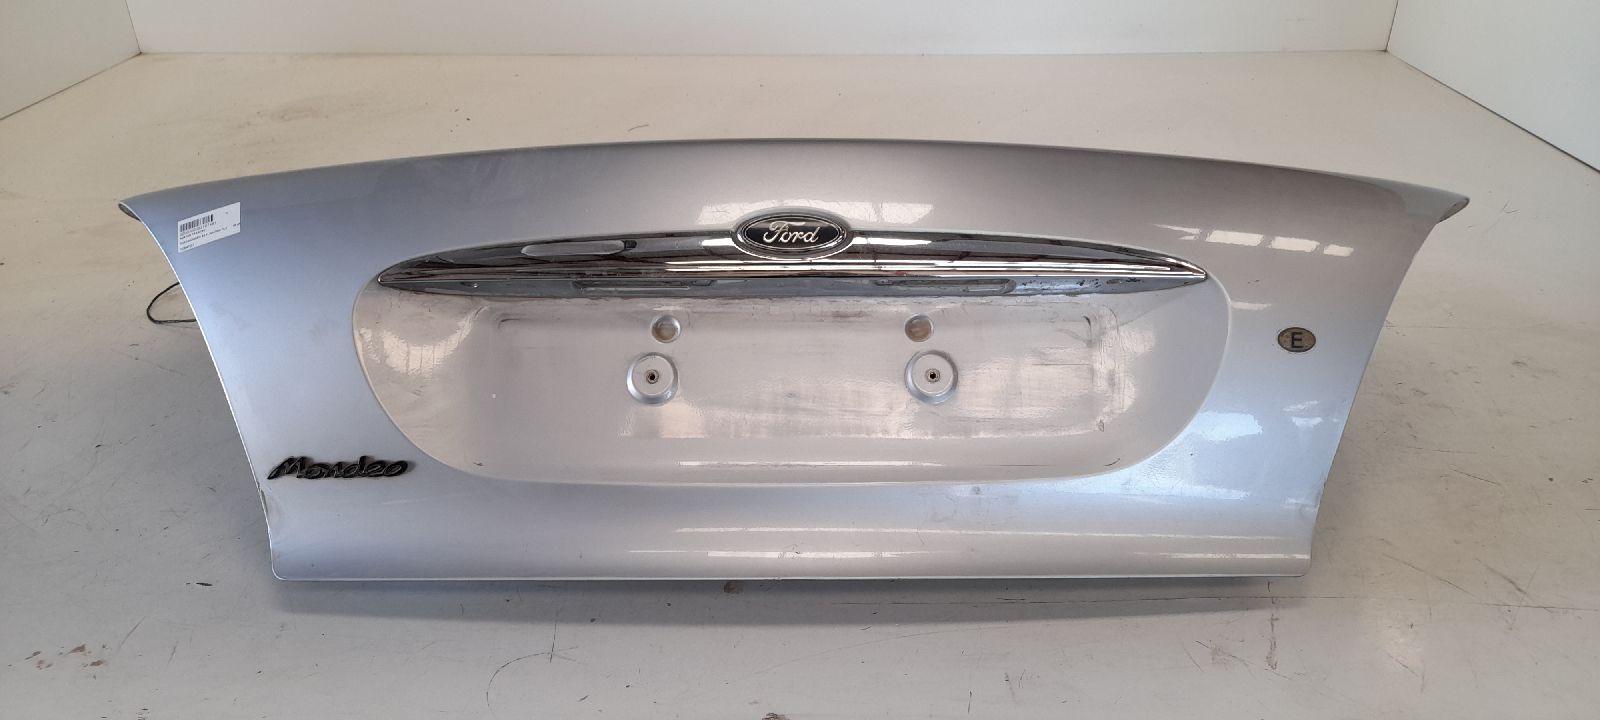 FORD Mondeo 2 generation (1996-2000) Bootlid Rear Boot 1084700, TAPAMALETERO 23005177